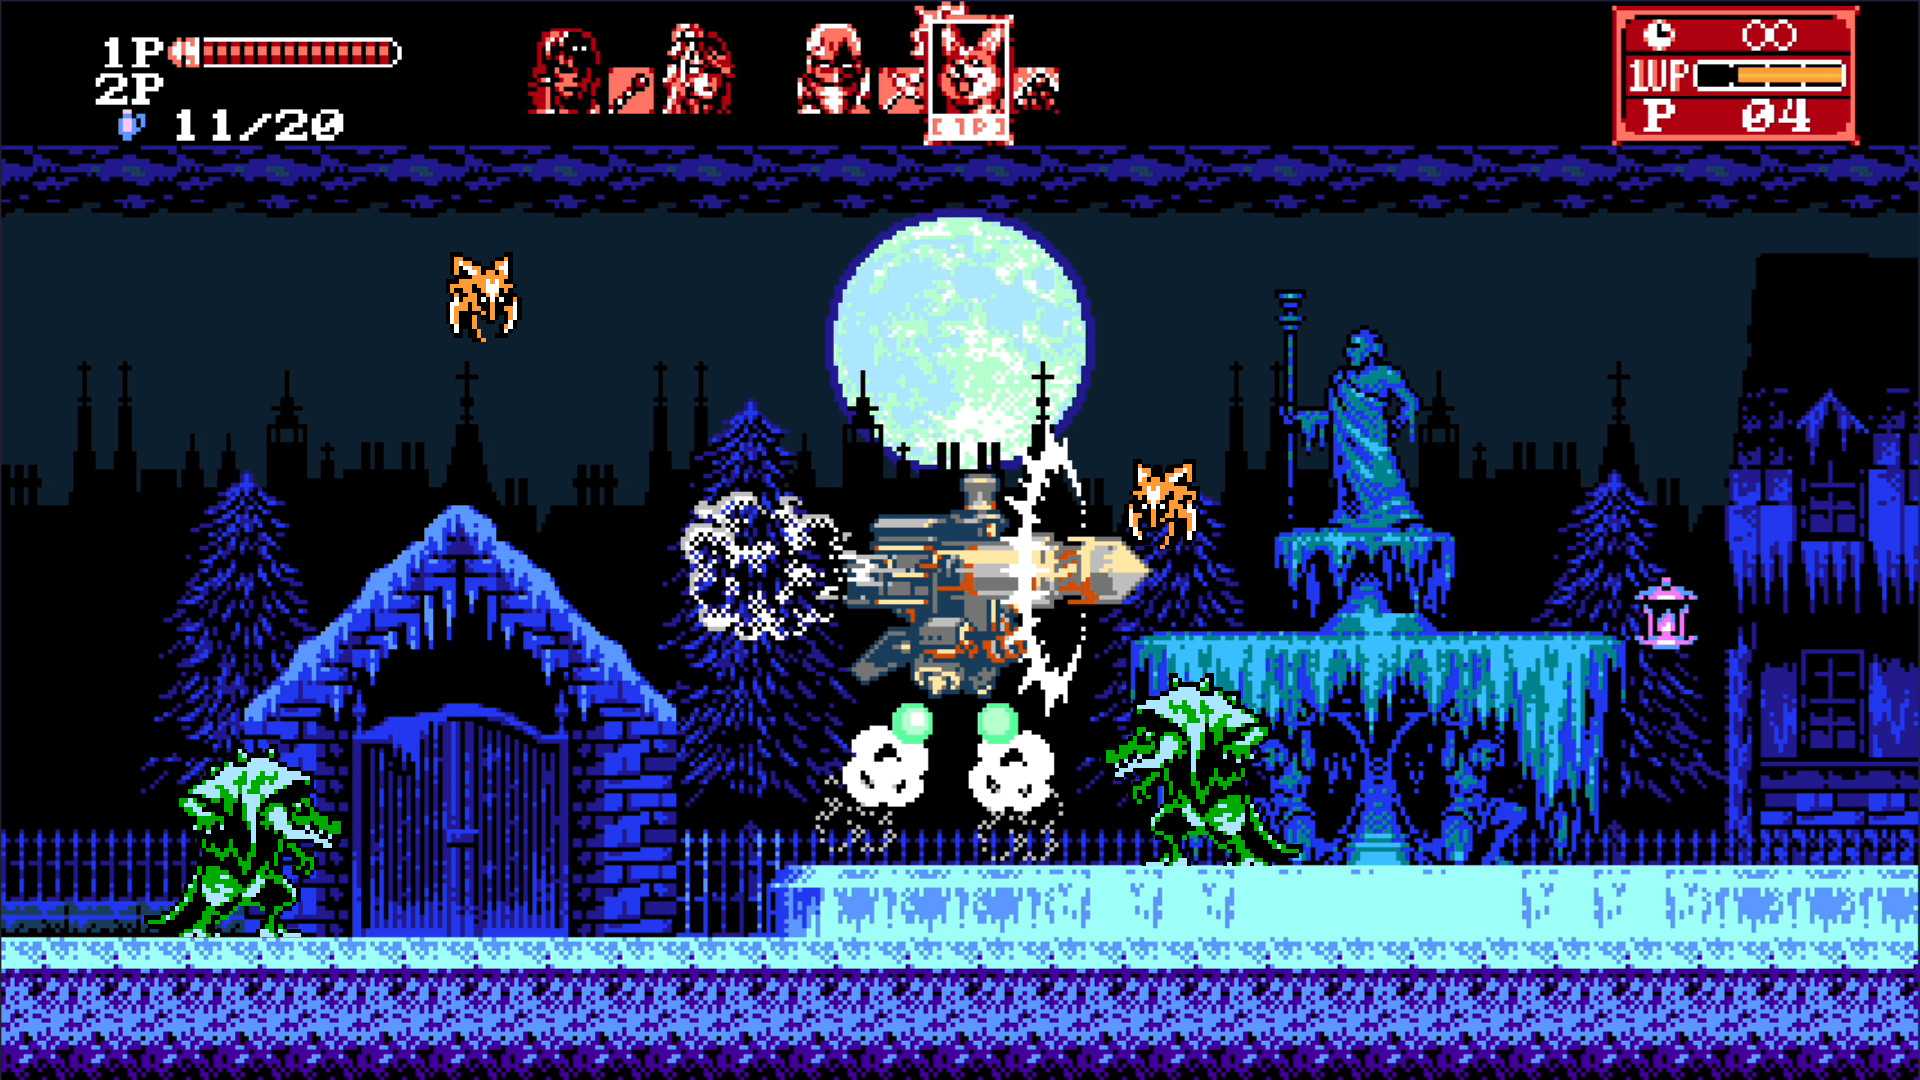 Bloodstained: Curse of the Moon 2 adds ‘Boss Rush Mode’ in an upcoming update